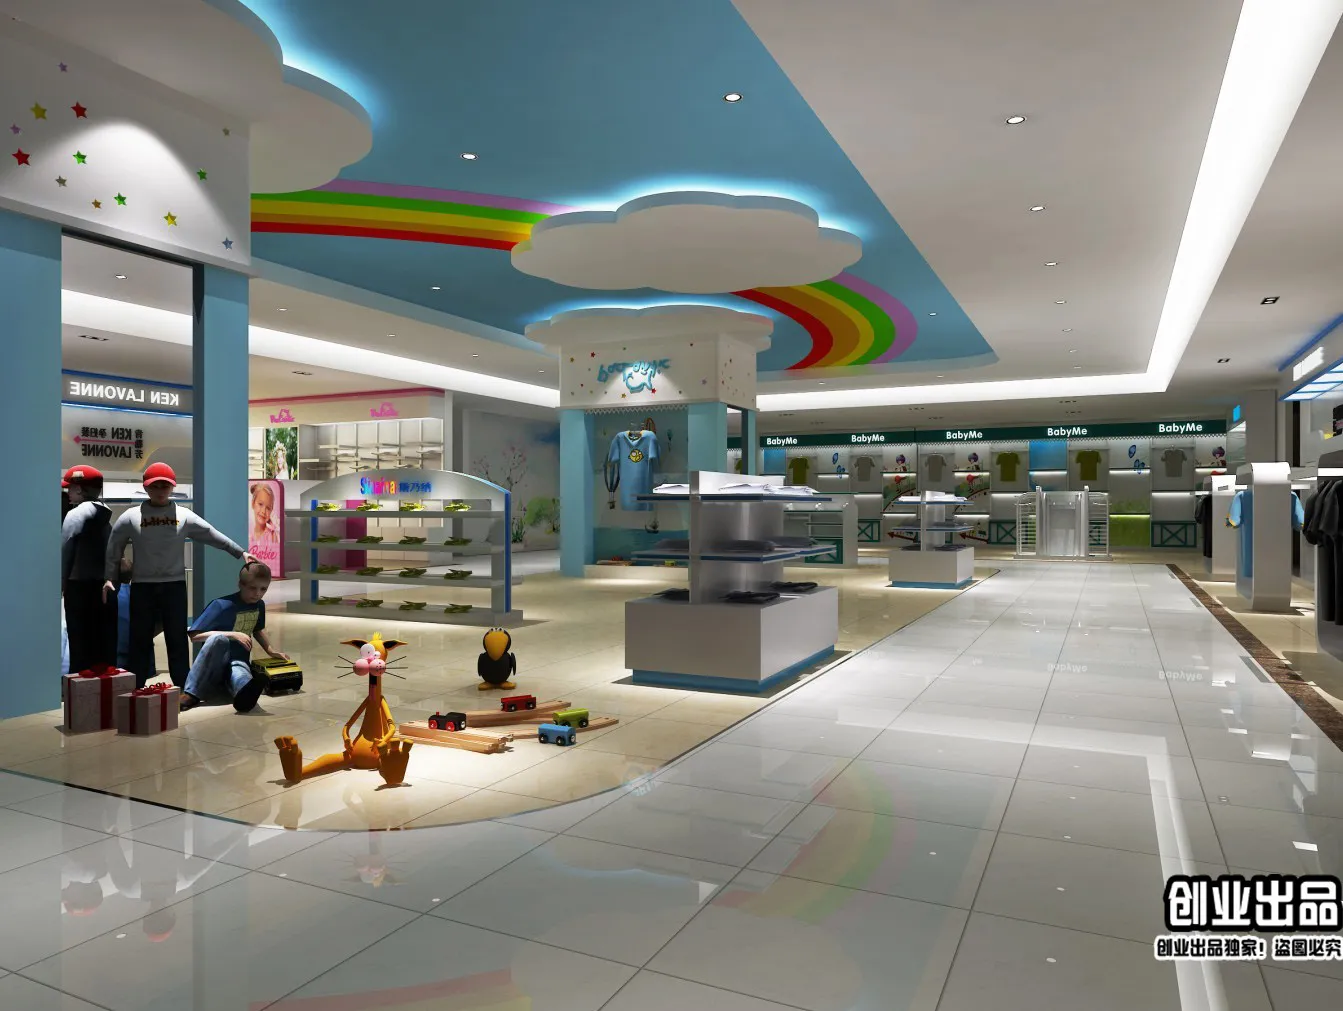 CLOTHING STORE – 3D SCENES – 0140